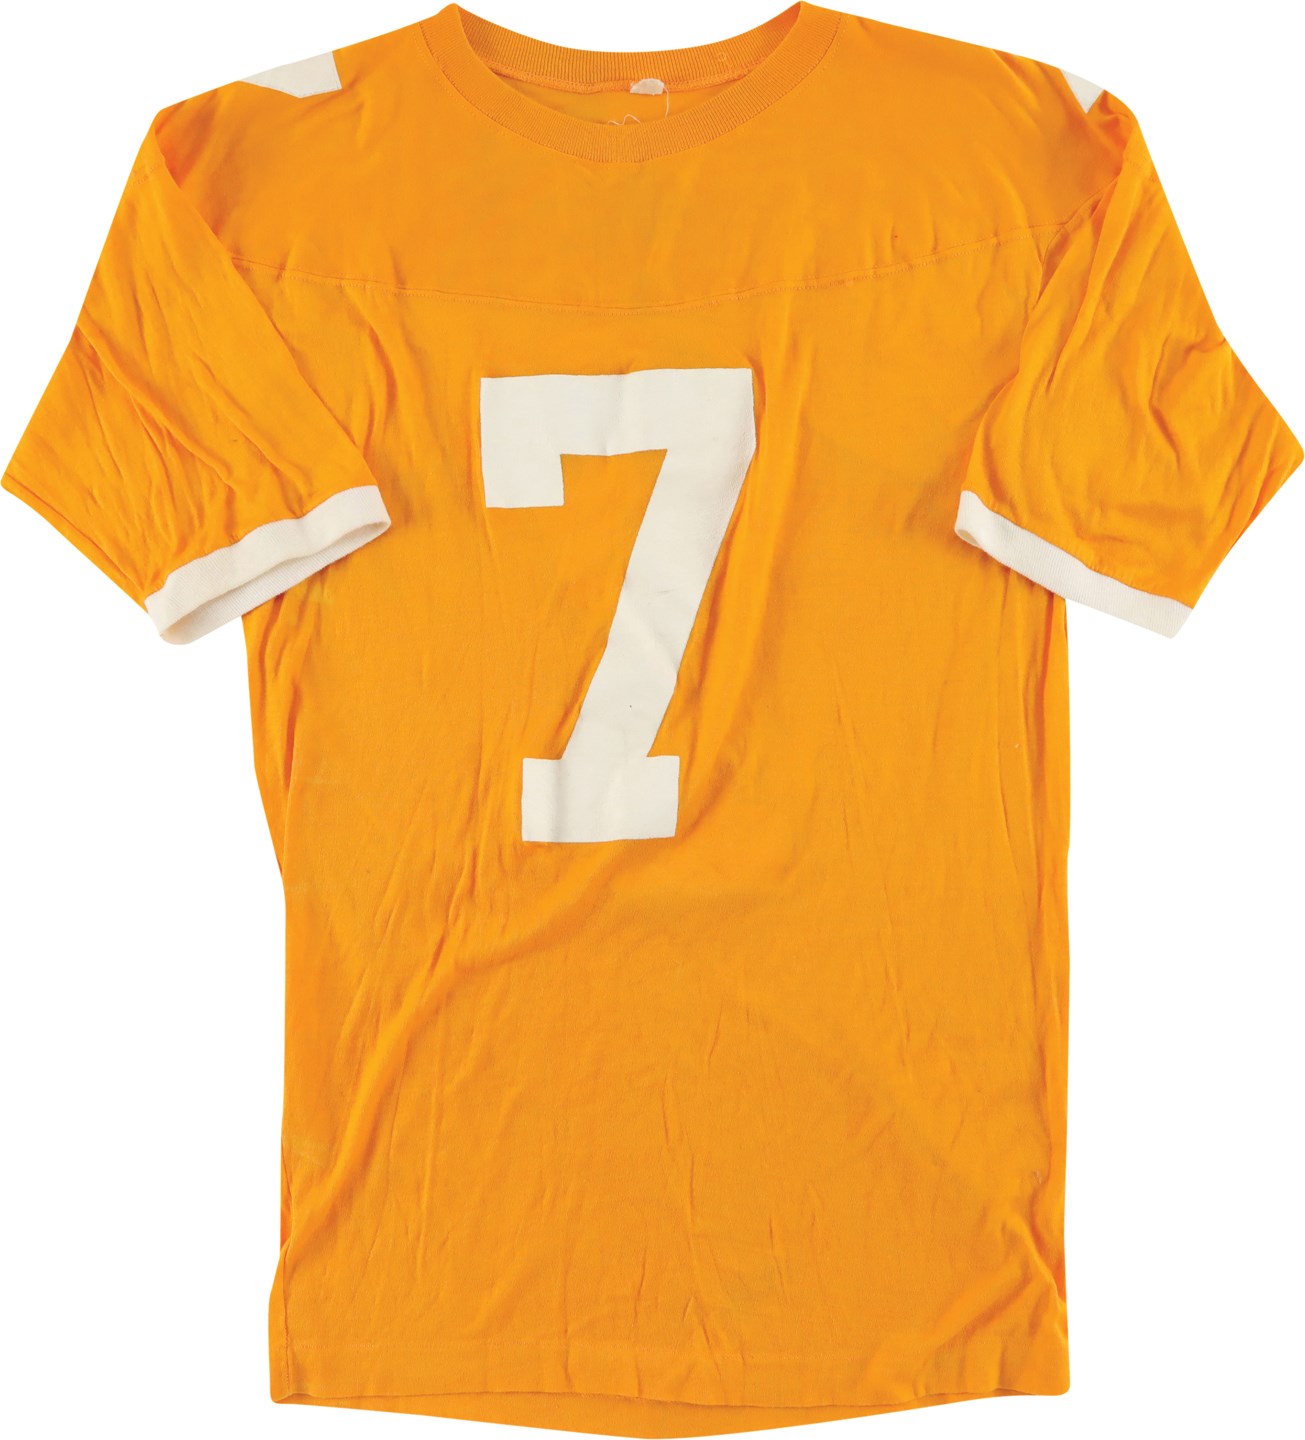 - Early 1970s Conredge Holloway University of Tennessee Game Worn Jersey - First African American Quarterback in the SEC